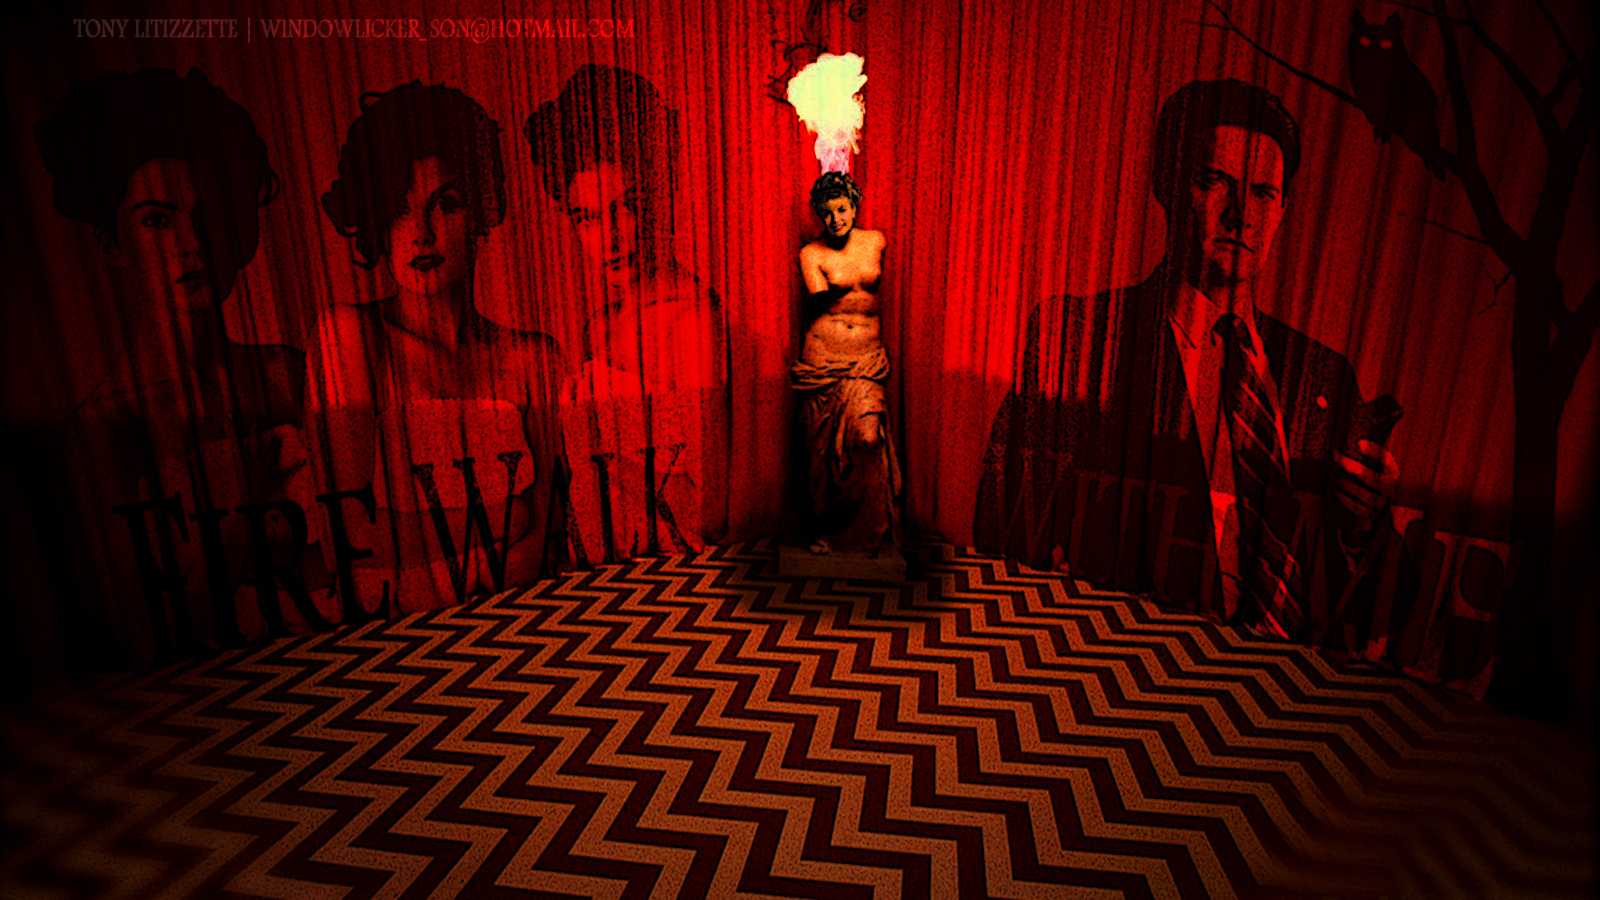 The Black Lodge - Sycamore Trees Twin Peaks - HD Wallpaper 